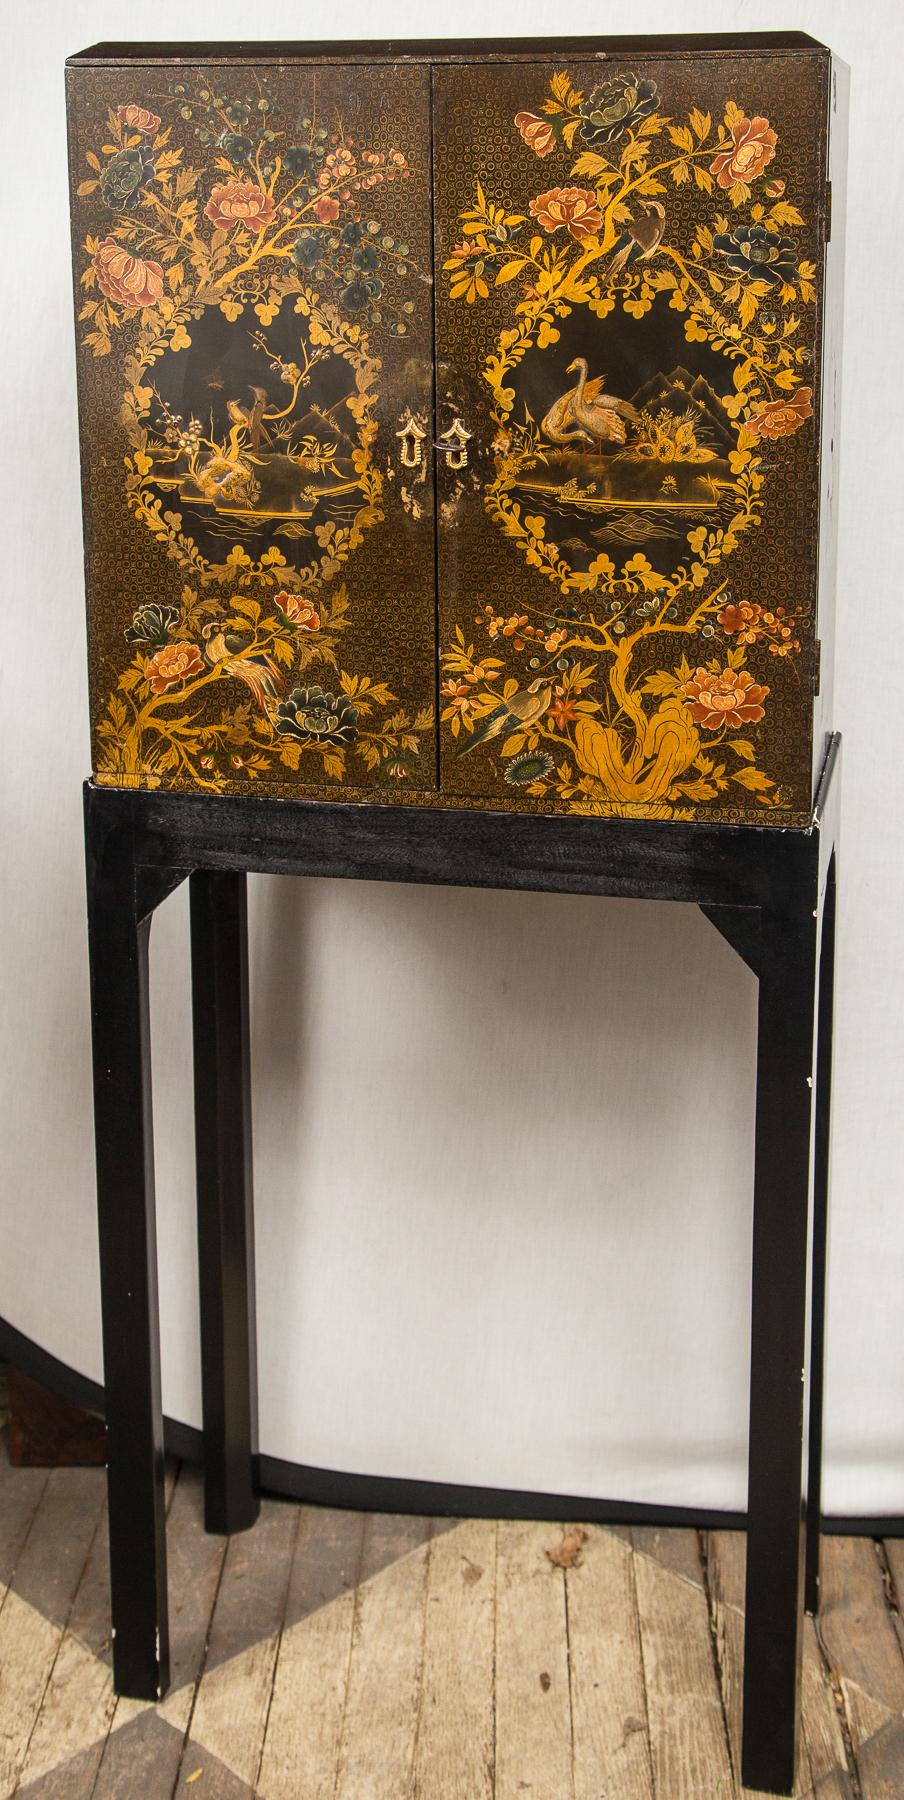 Lacquer in the Japanese style. Double doors, interior with multiple graduated drawers. On a modern Stand. Drawers increase from 1.5 to 2.5 inches in depth. There are 8 drawers behind each door for a total of 16 drawers. Probably made as a collectors